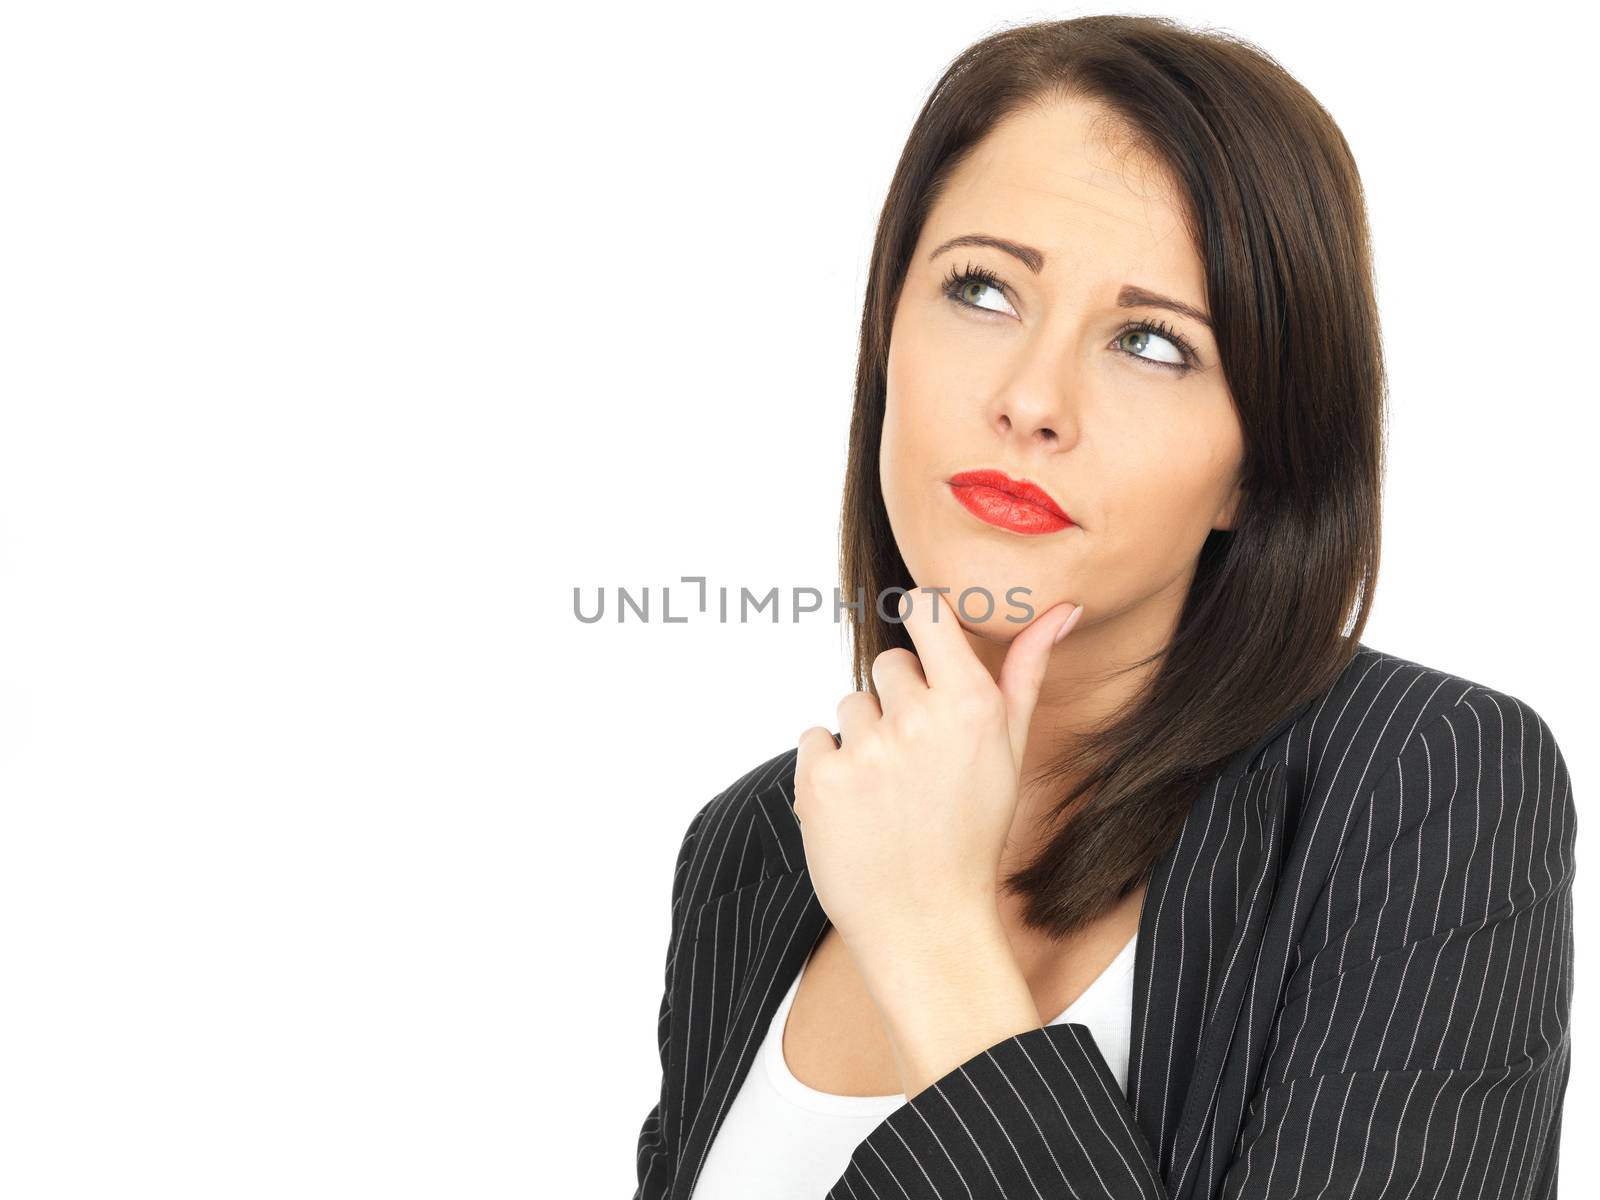 Thoughtful Conerned Young Business Woman by Whiteboxmedia